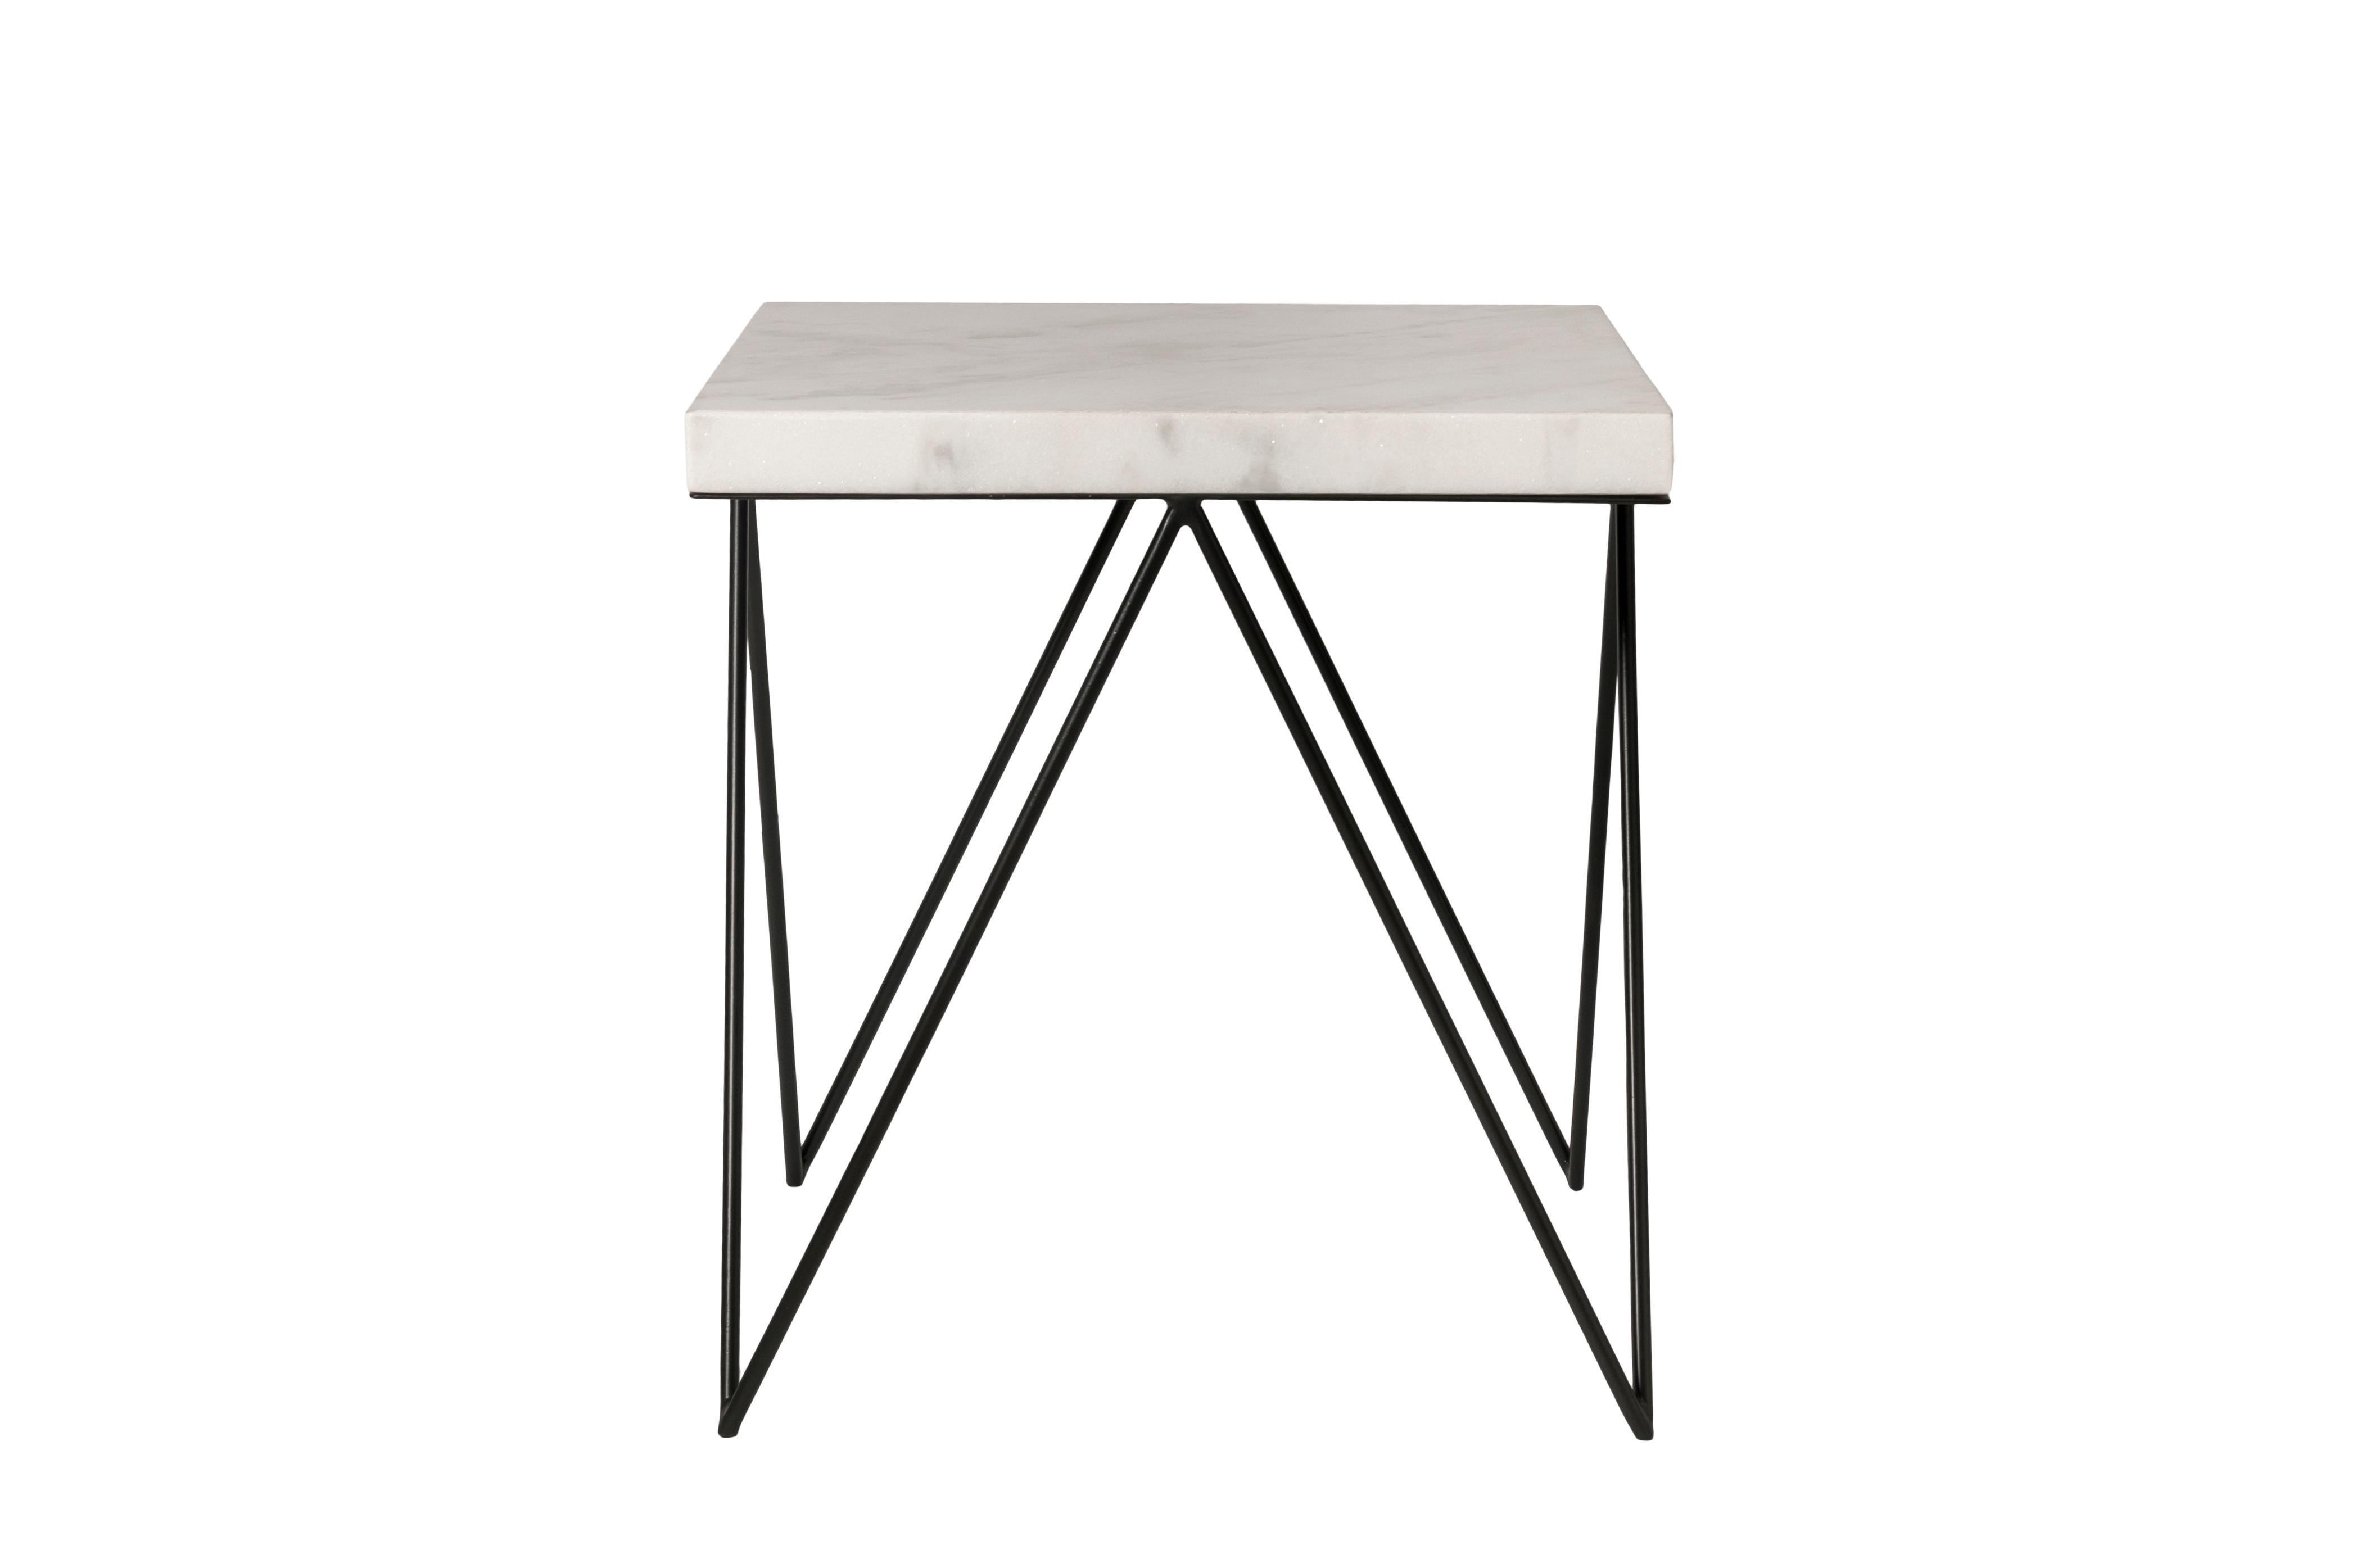 Chakra table by Roberta Rampazzo
Current Production
Dimensions: W 50 x D 50 x H 55 cm
Materials: Piguês white marble
Also available: Nero Marquina, Piguês white

Designed with simple but strong lines, the table Chakra represents our constant